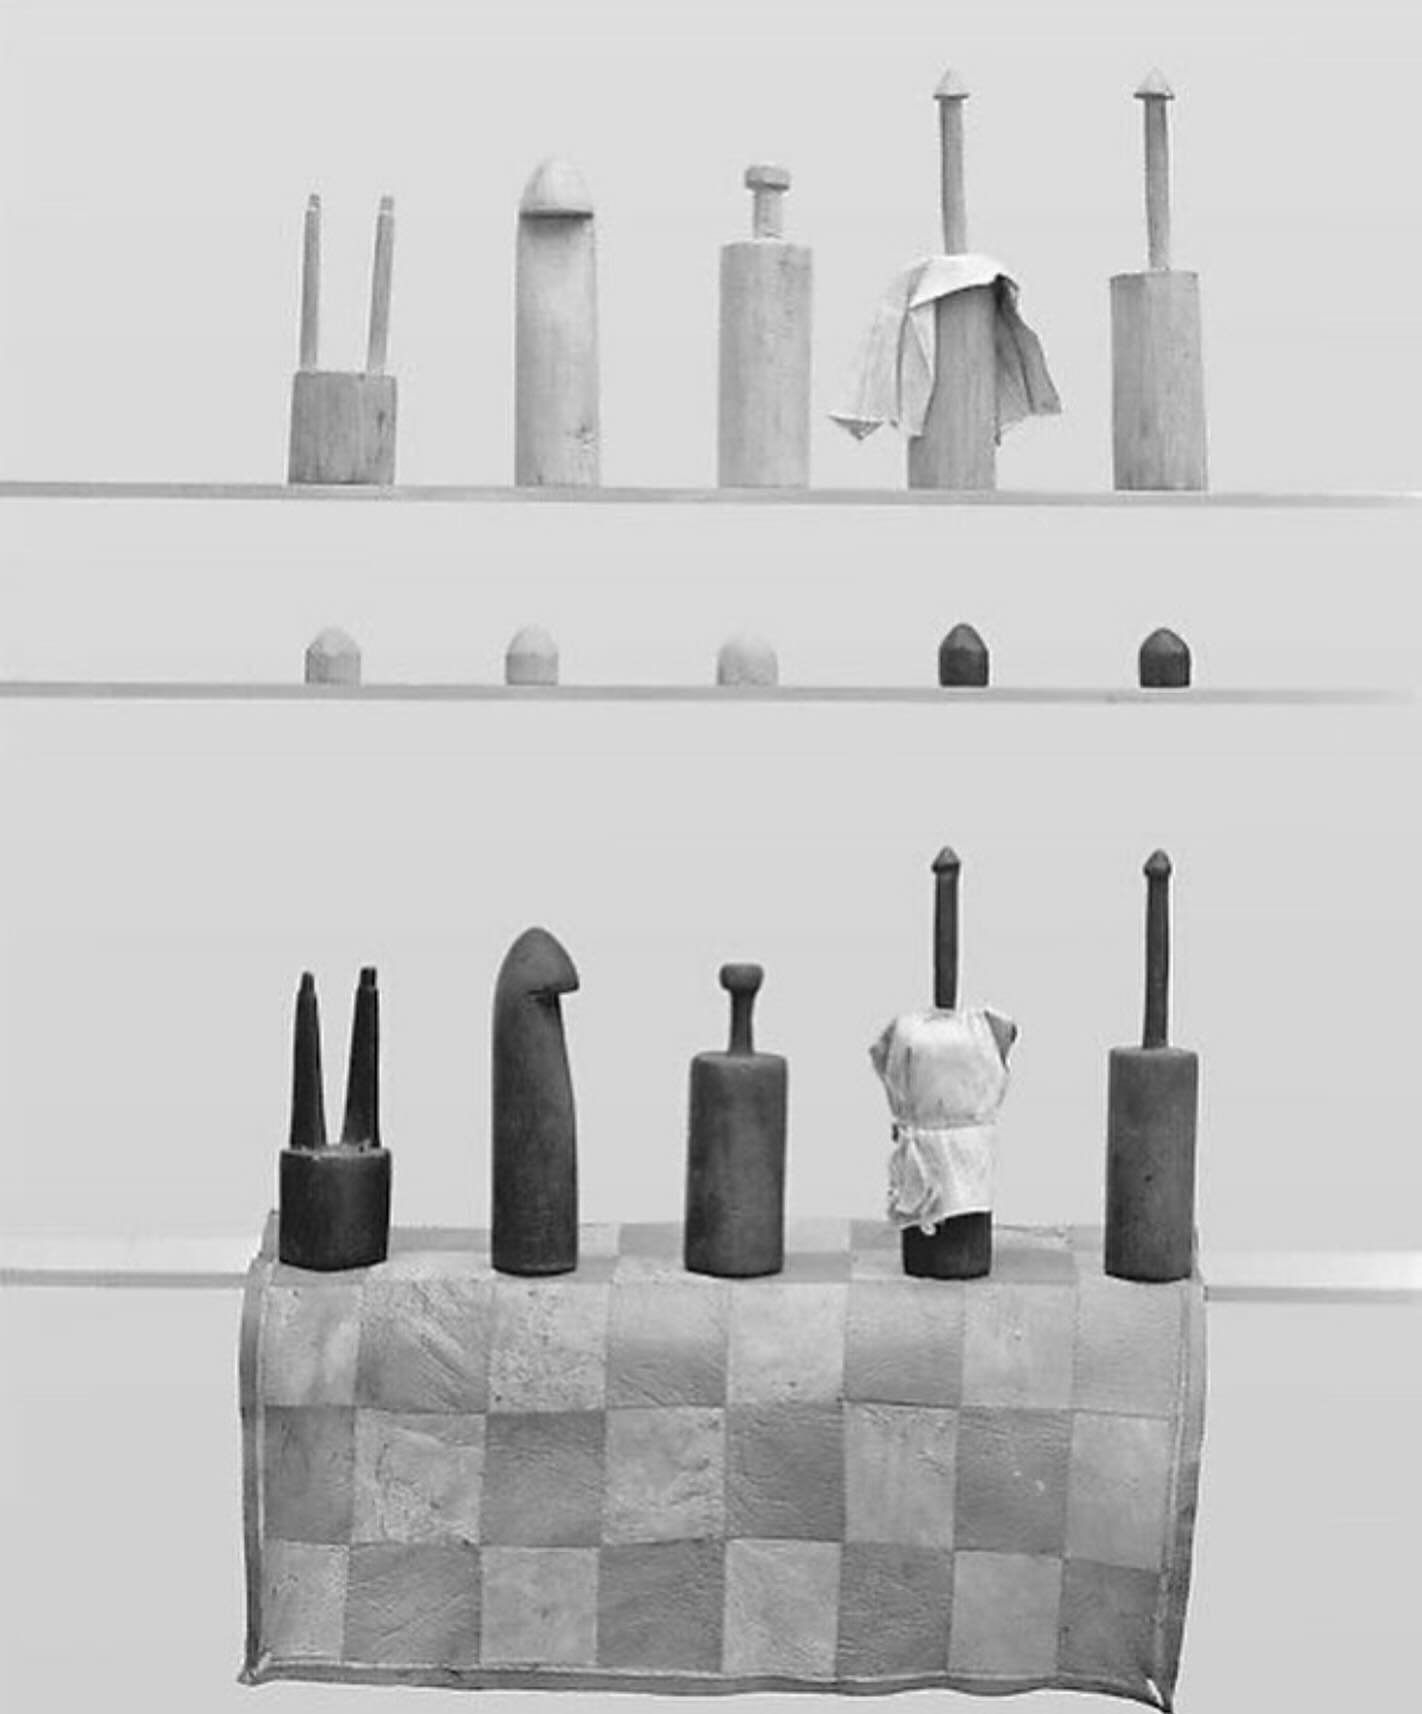 Chess set from the 20th century via @bae_aulenti